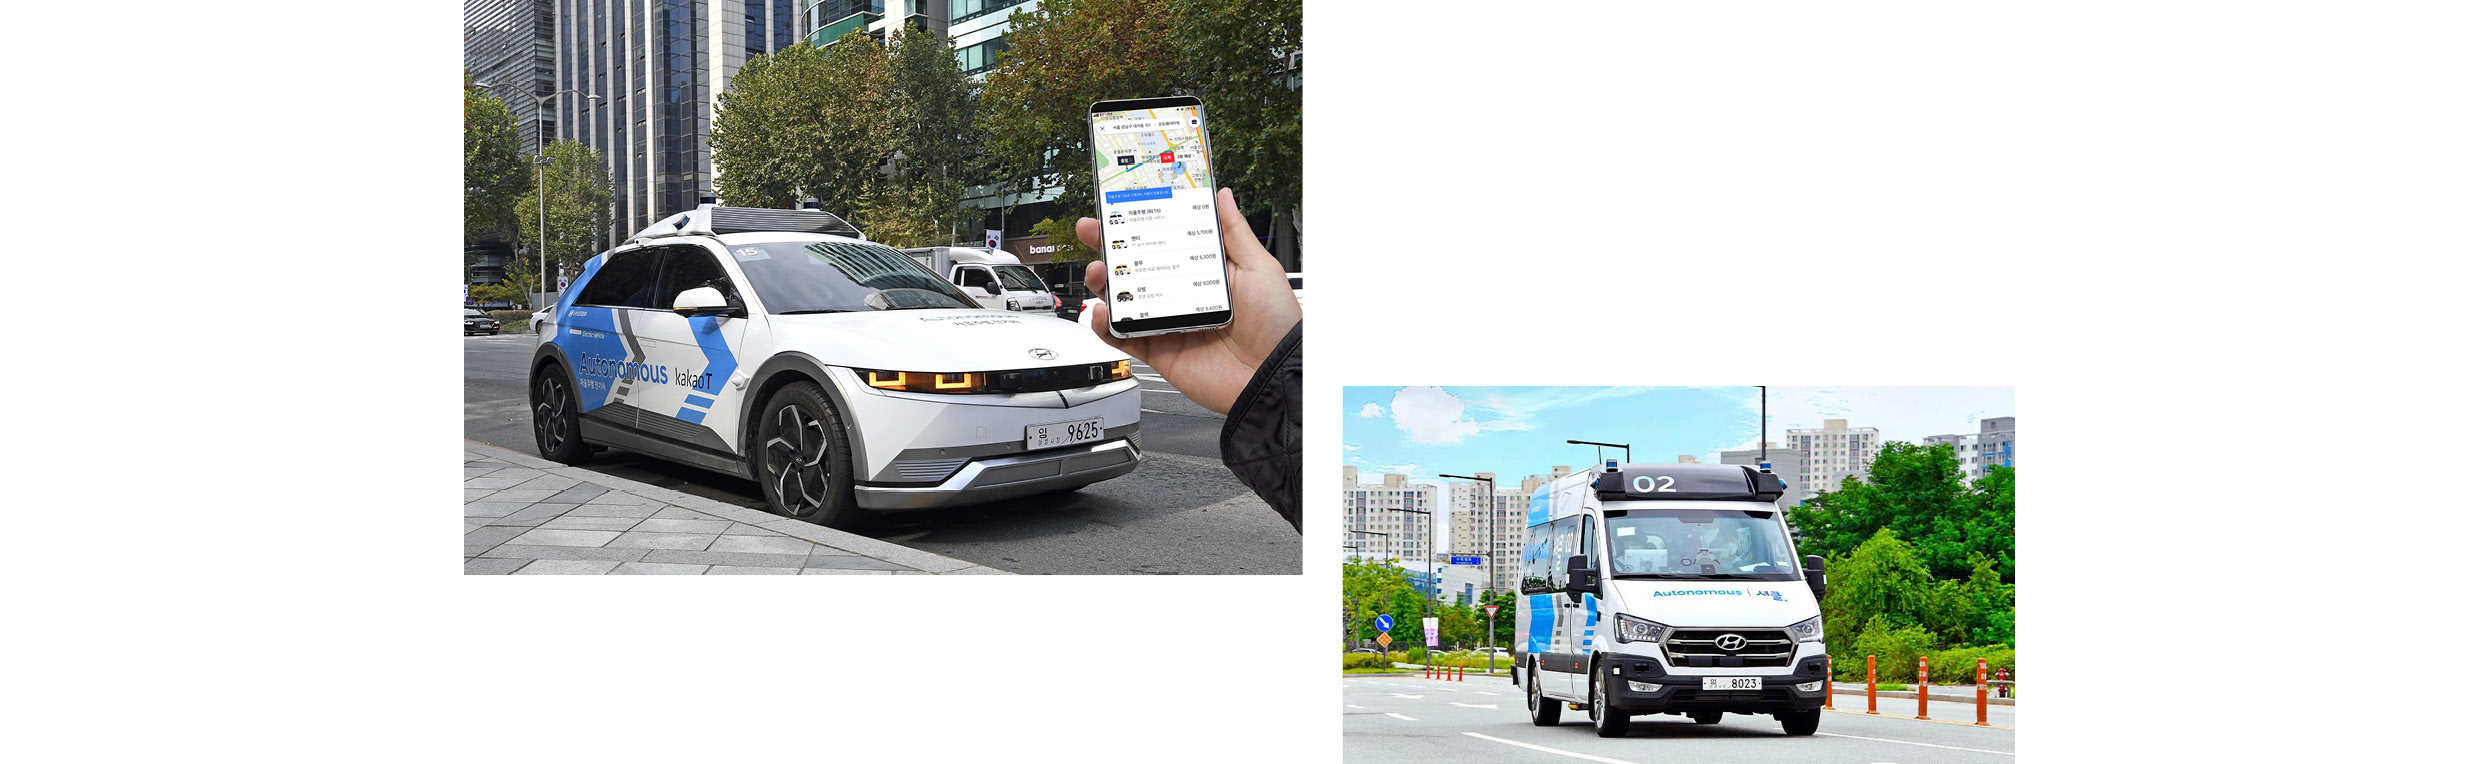 A self-driving vehicle being piloted by Hyundai Motor Group